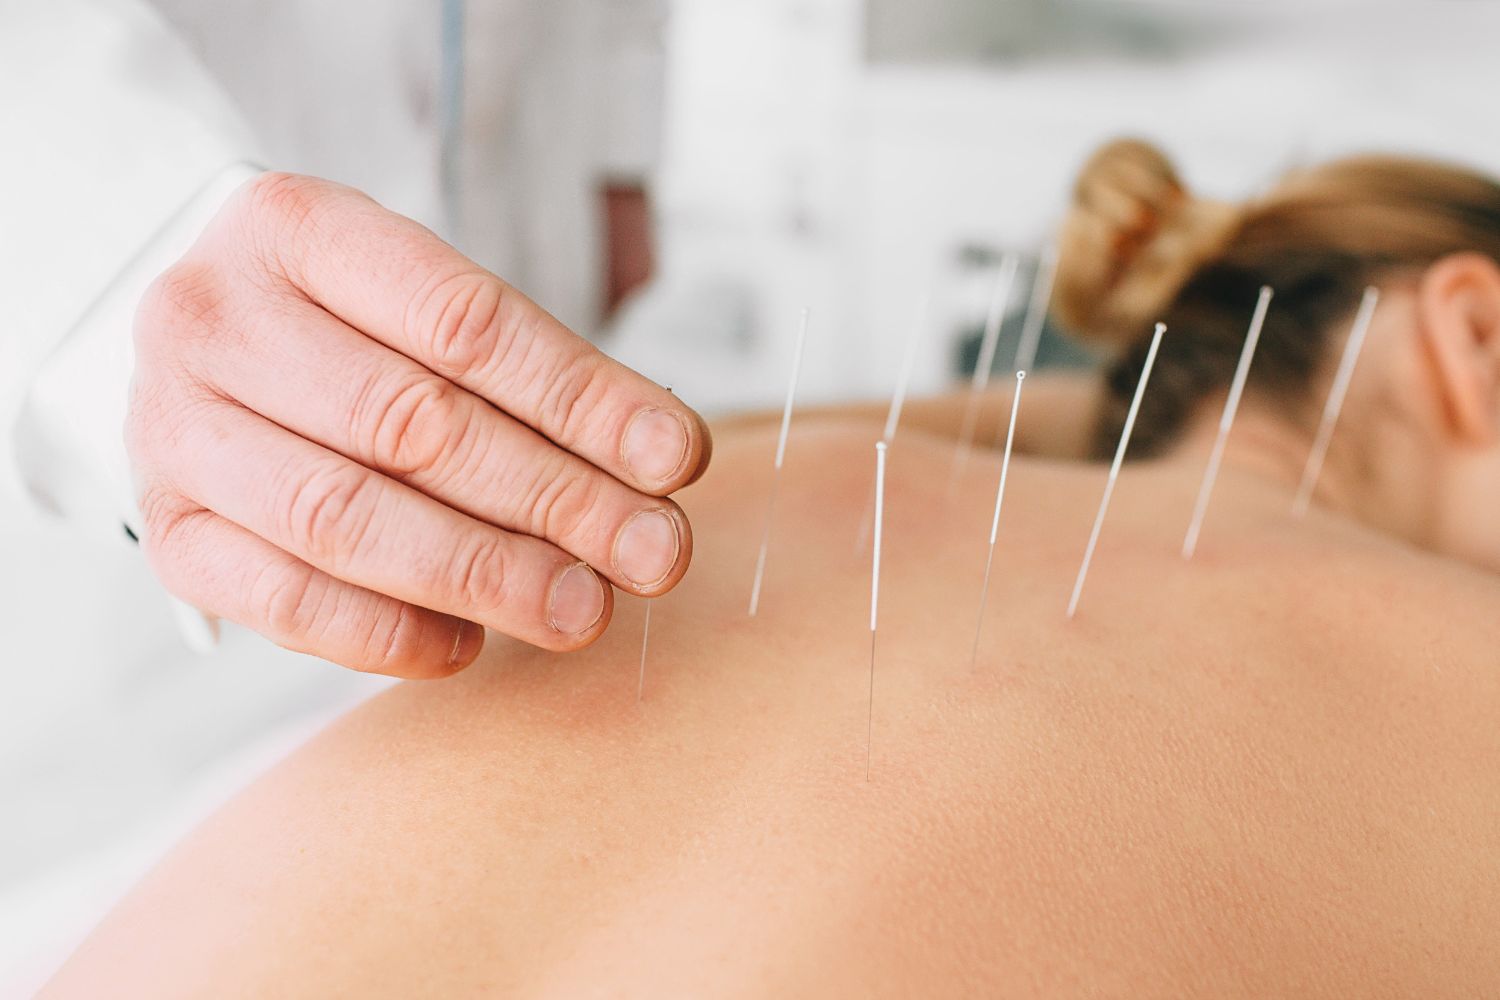 Huang Wellness Center offers acupuncture care for northern Virginia communities